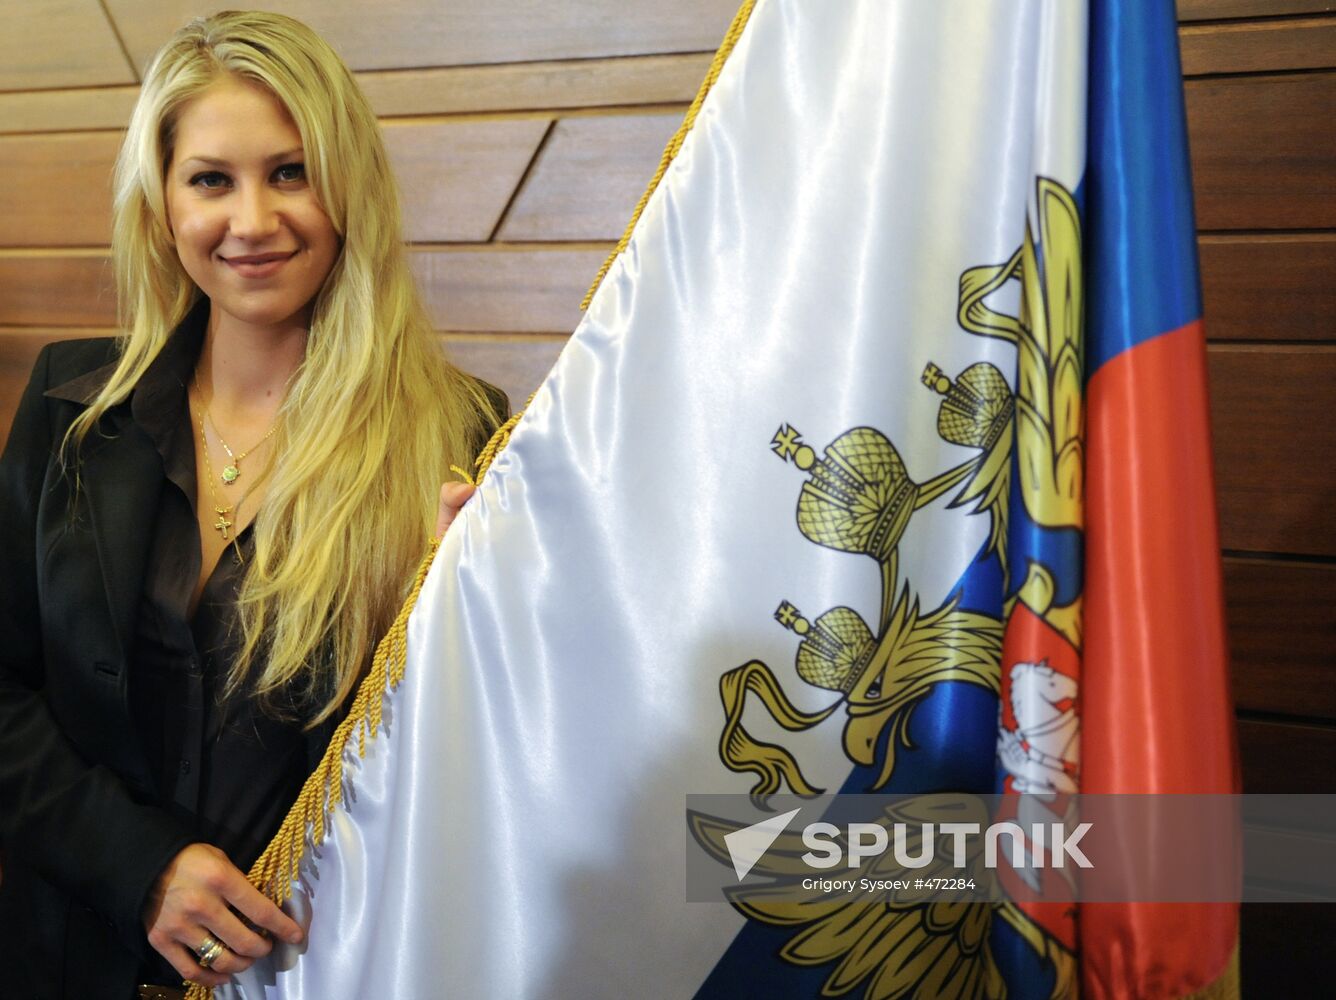 Anna Kournikova gives news conference in Moscow